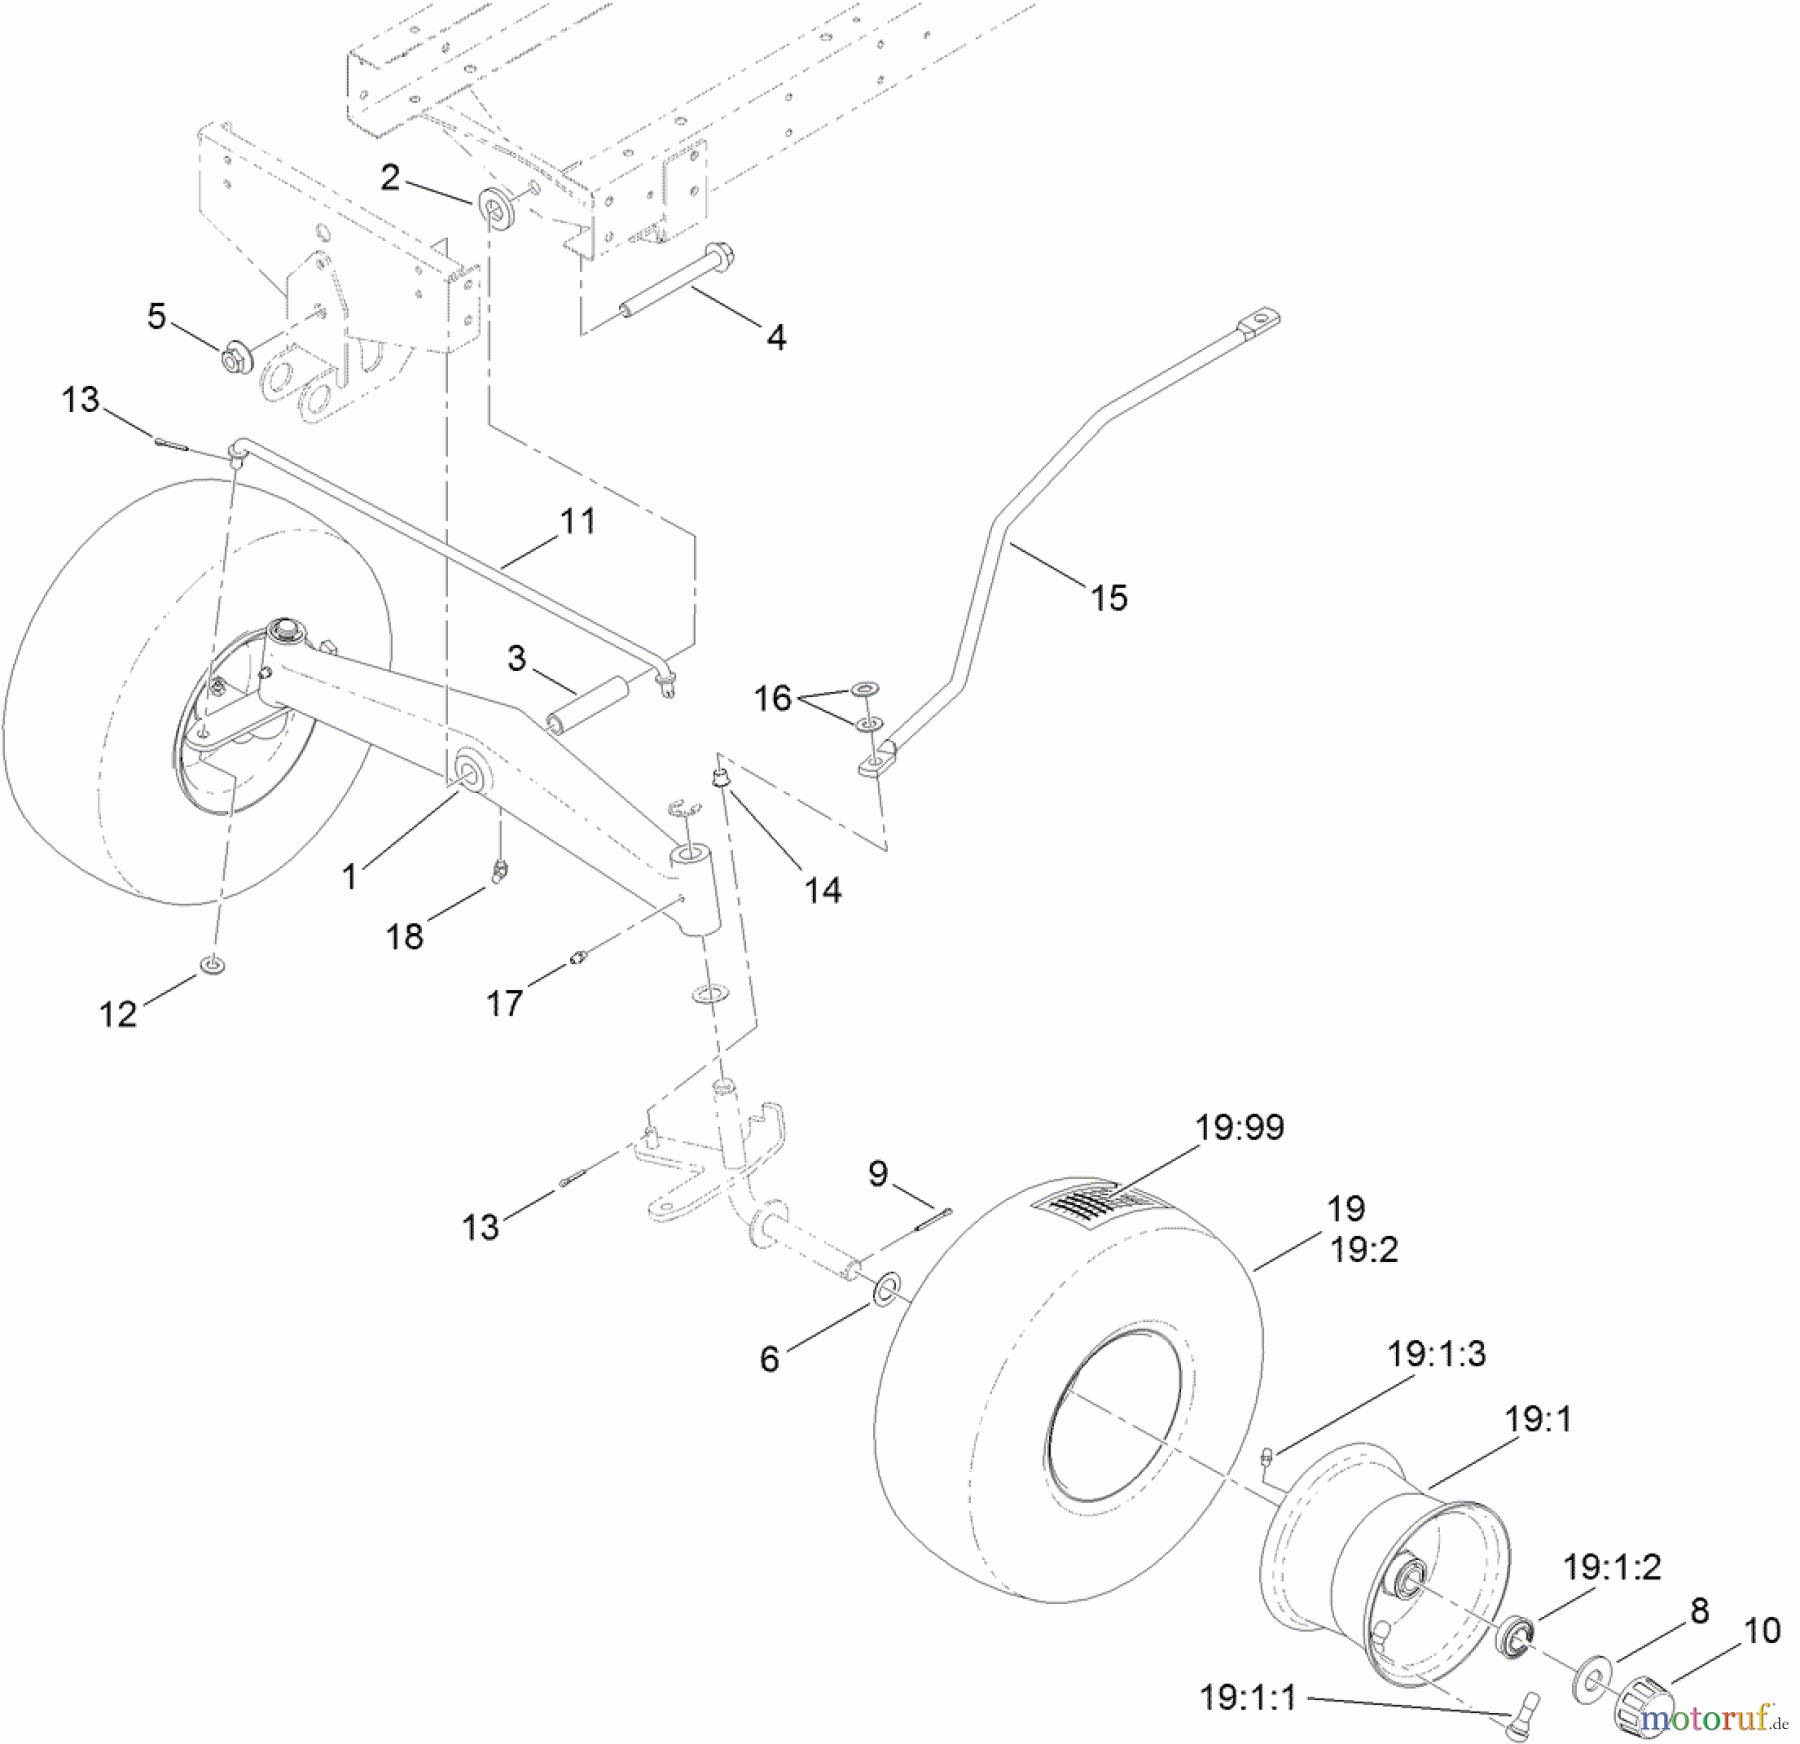  Toro Neu Mowers, Lawn & Garden Tractor Seite 1 71254 (XLS 380) - Toro XLS 380 Lawn Tractor, 2012 (SN 312000001-312999999) FRONT WHEEL AND AXLE ASSEMBLY